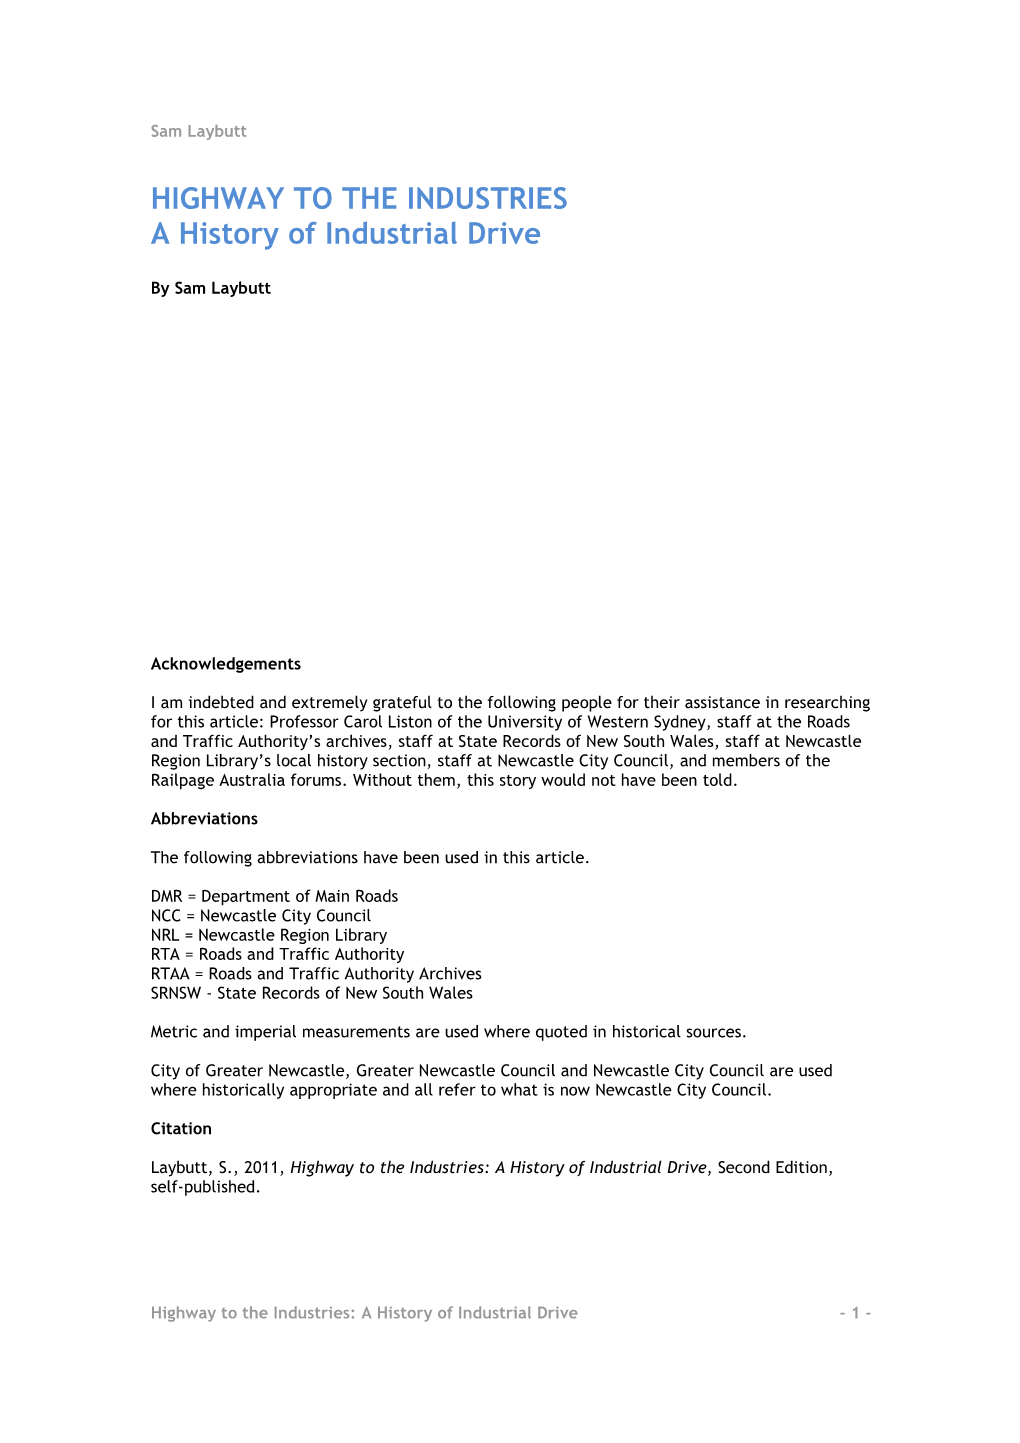 HIGHWAY to the INDUSTRIES a History of Industrial Drive